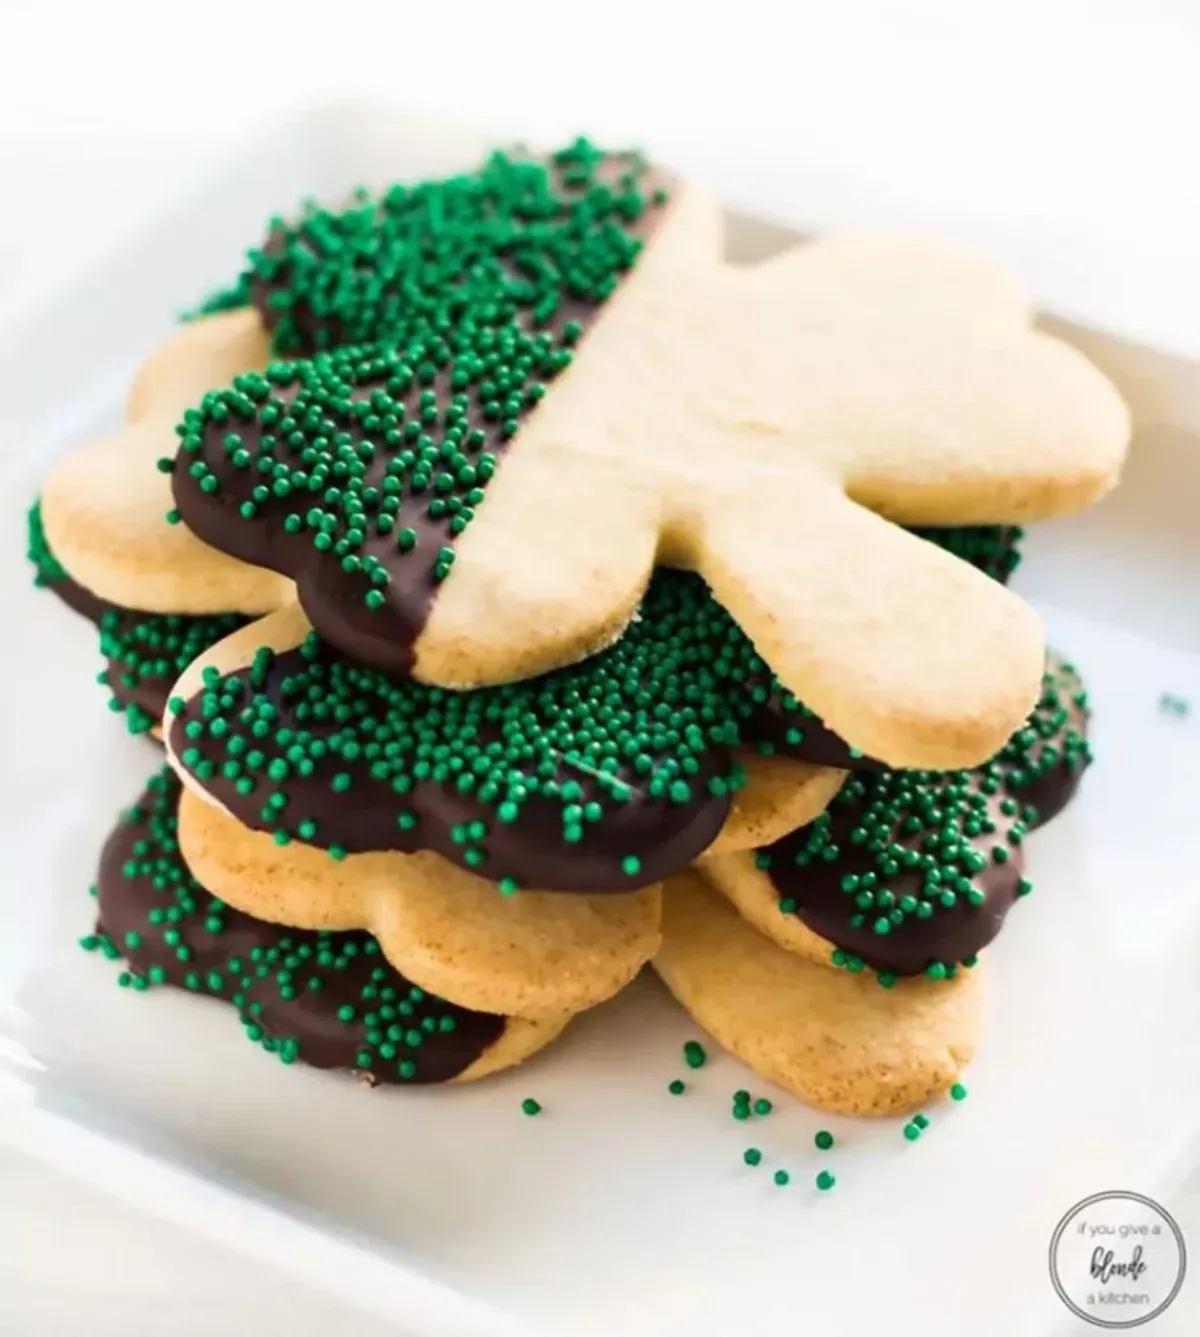 1677529622 225 The best recipes for St Patricks Day.webp - The best recipes for St. Patrick's Day